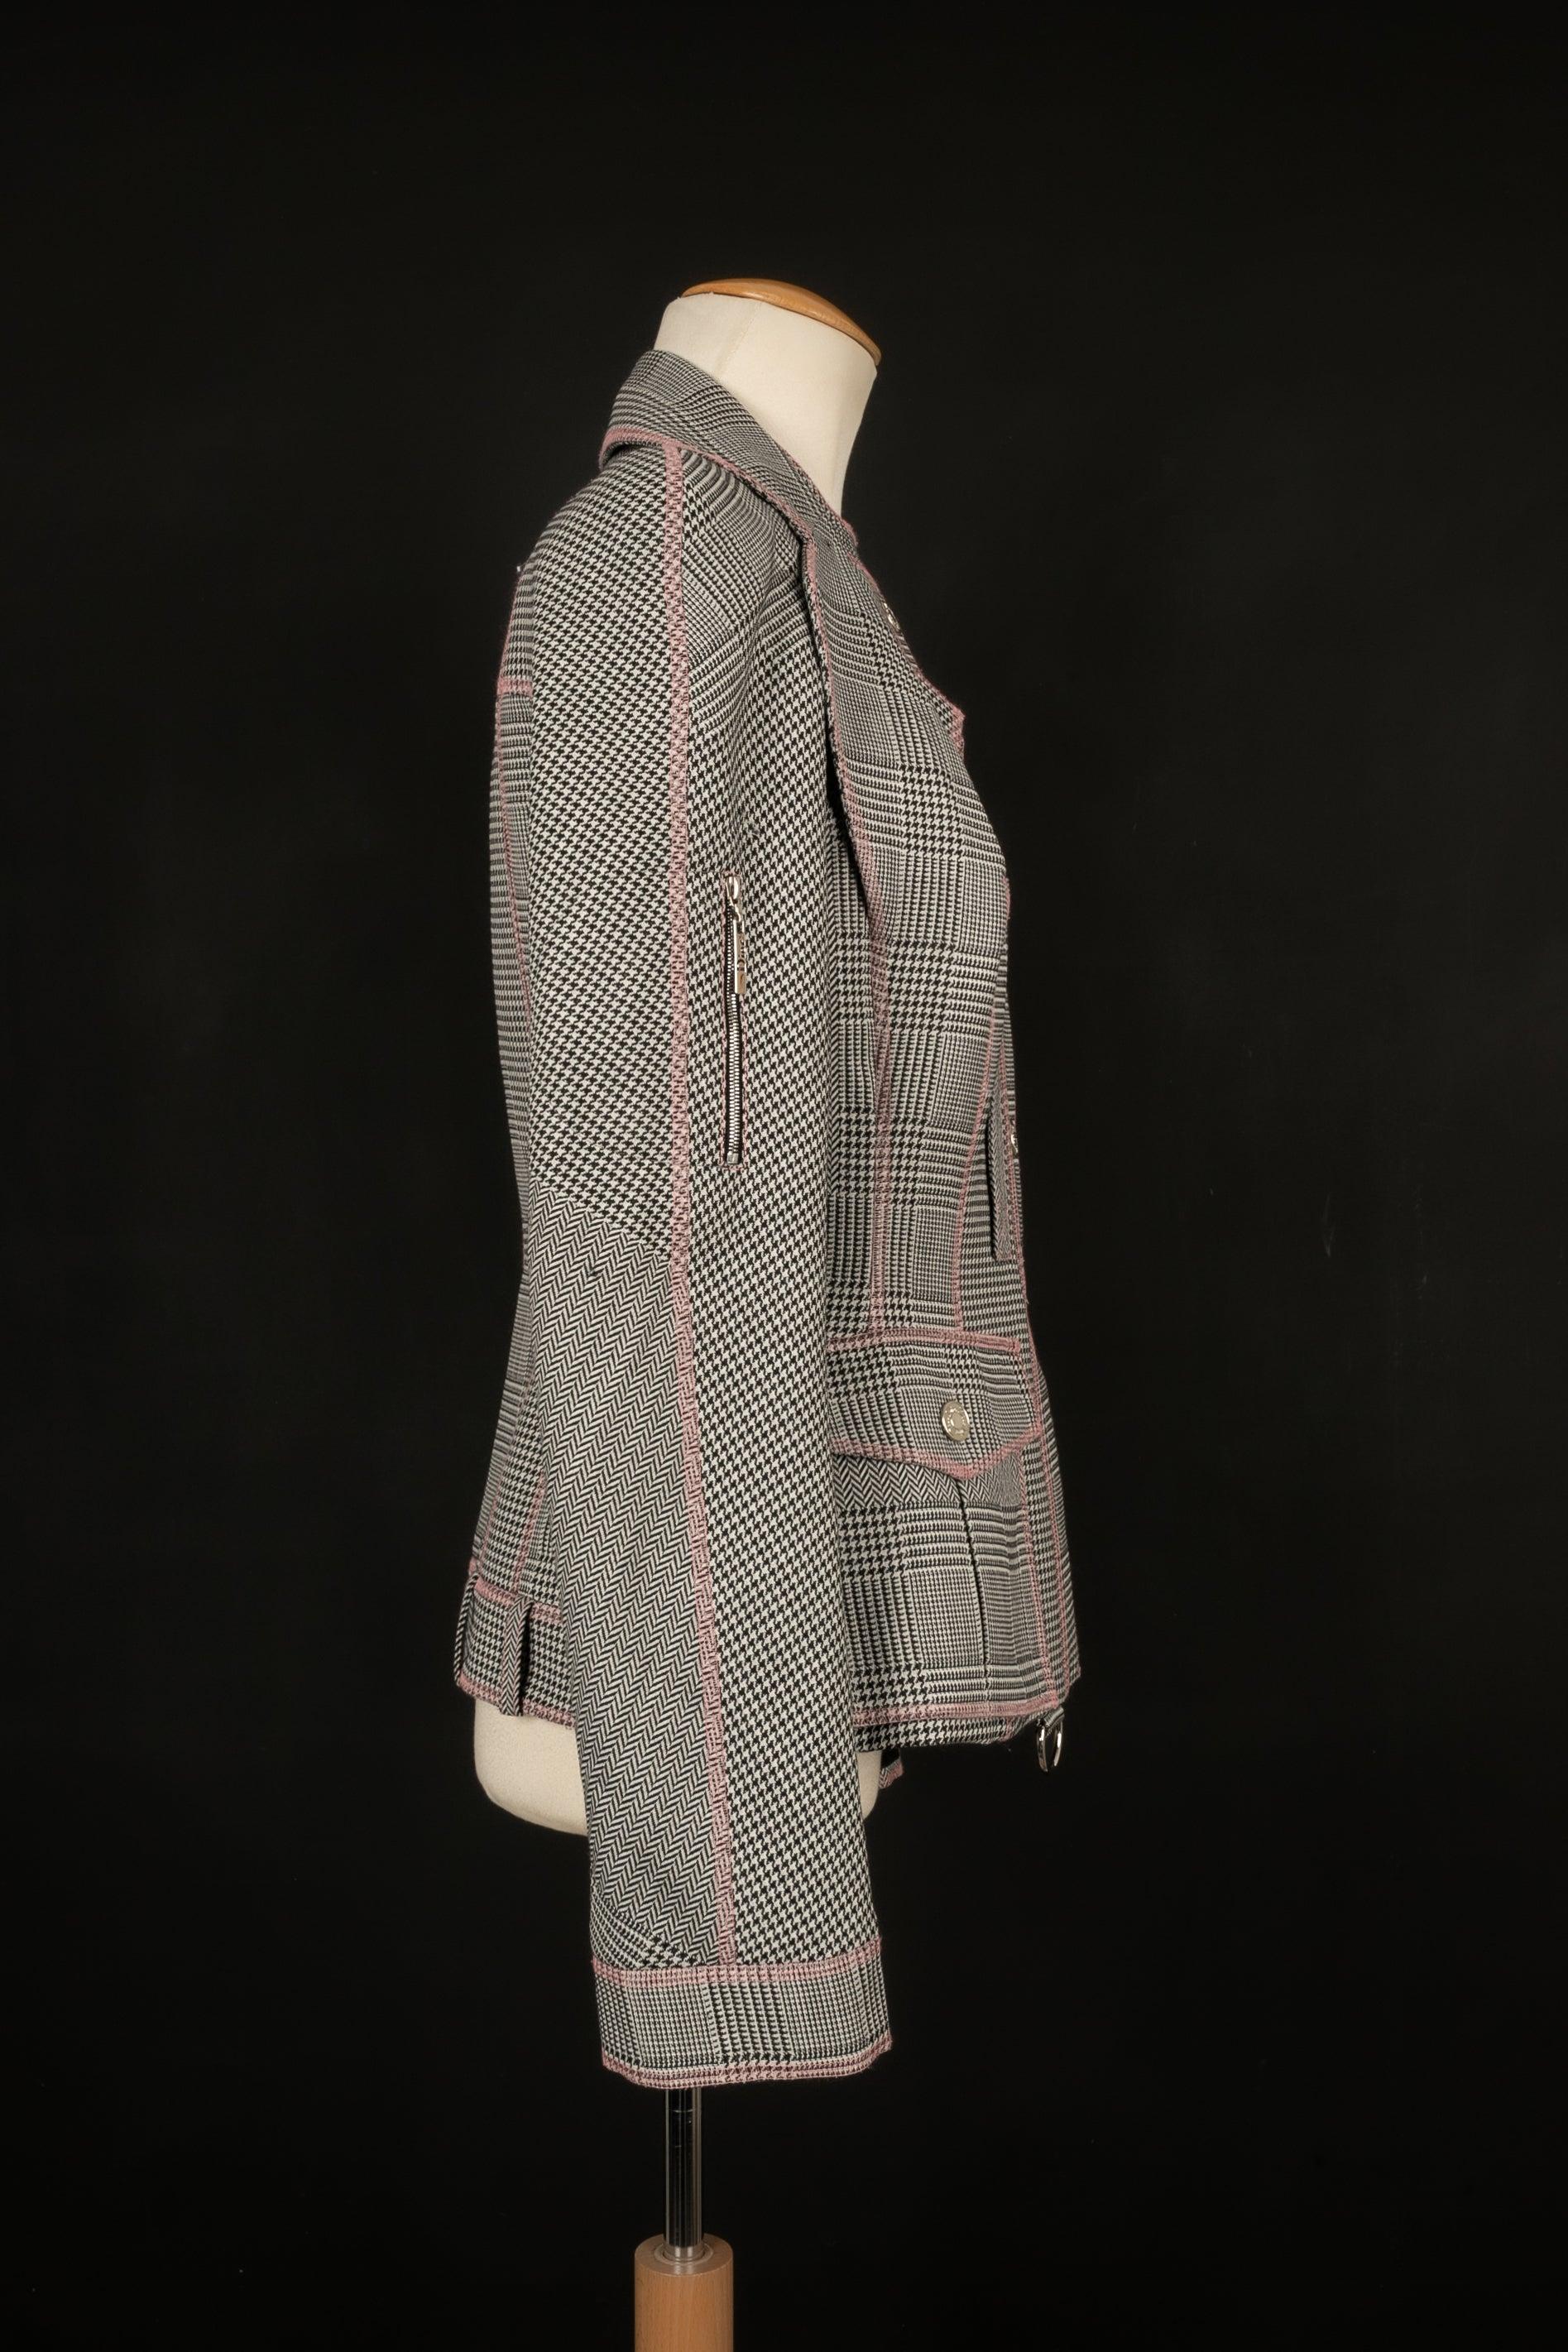 Dior- (Made in France) Grey and pink wool and silk set. The jacket indicated a 40FR and the top a 38FR. 2005 Spring-Summer Collection under the artistic direction of John Galliano.

Additional information:
Condition: Very good condition
Dimensions: